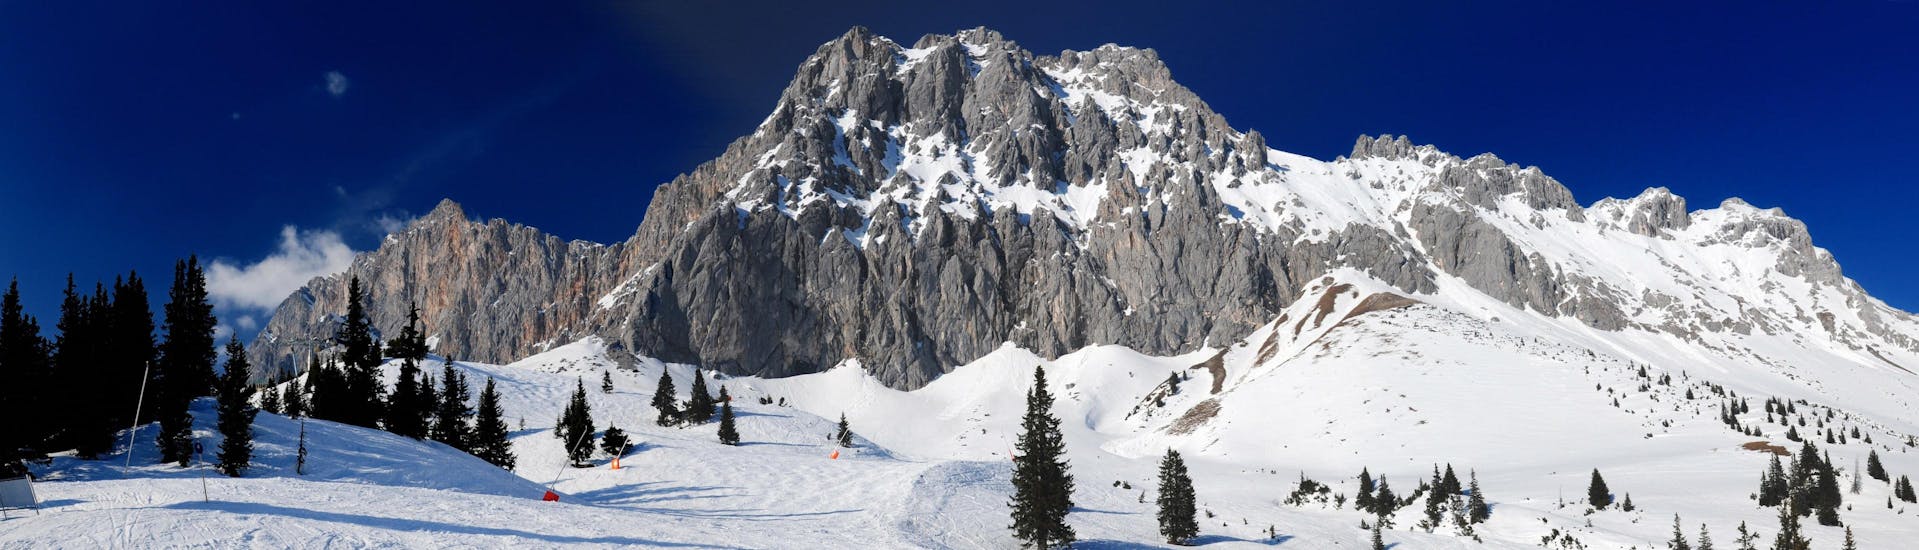 View of the mountain panorama in the ski resort of Ehrwalder Alm, where local ski schools offer their ski lessons.